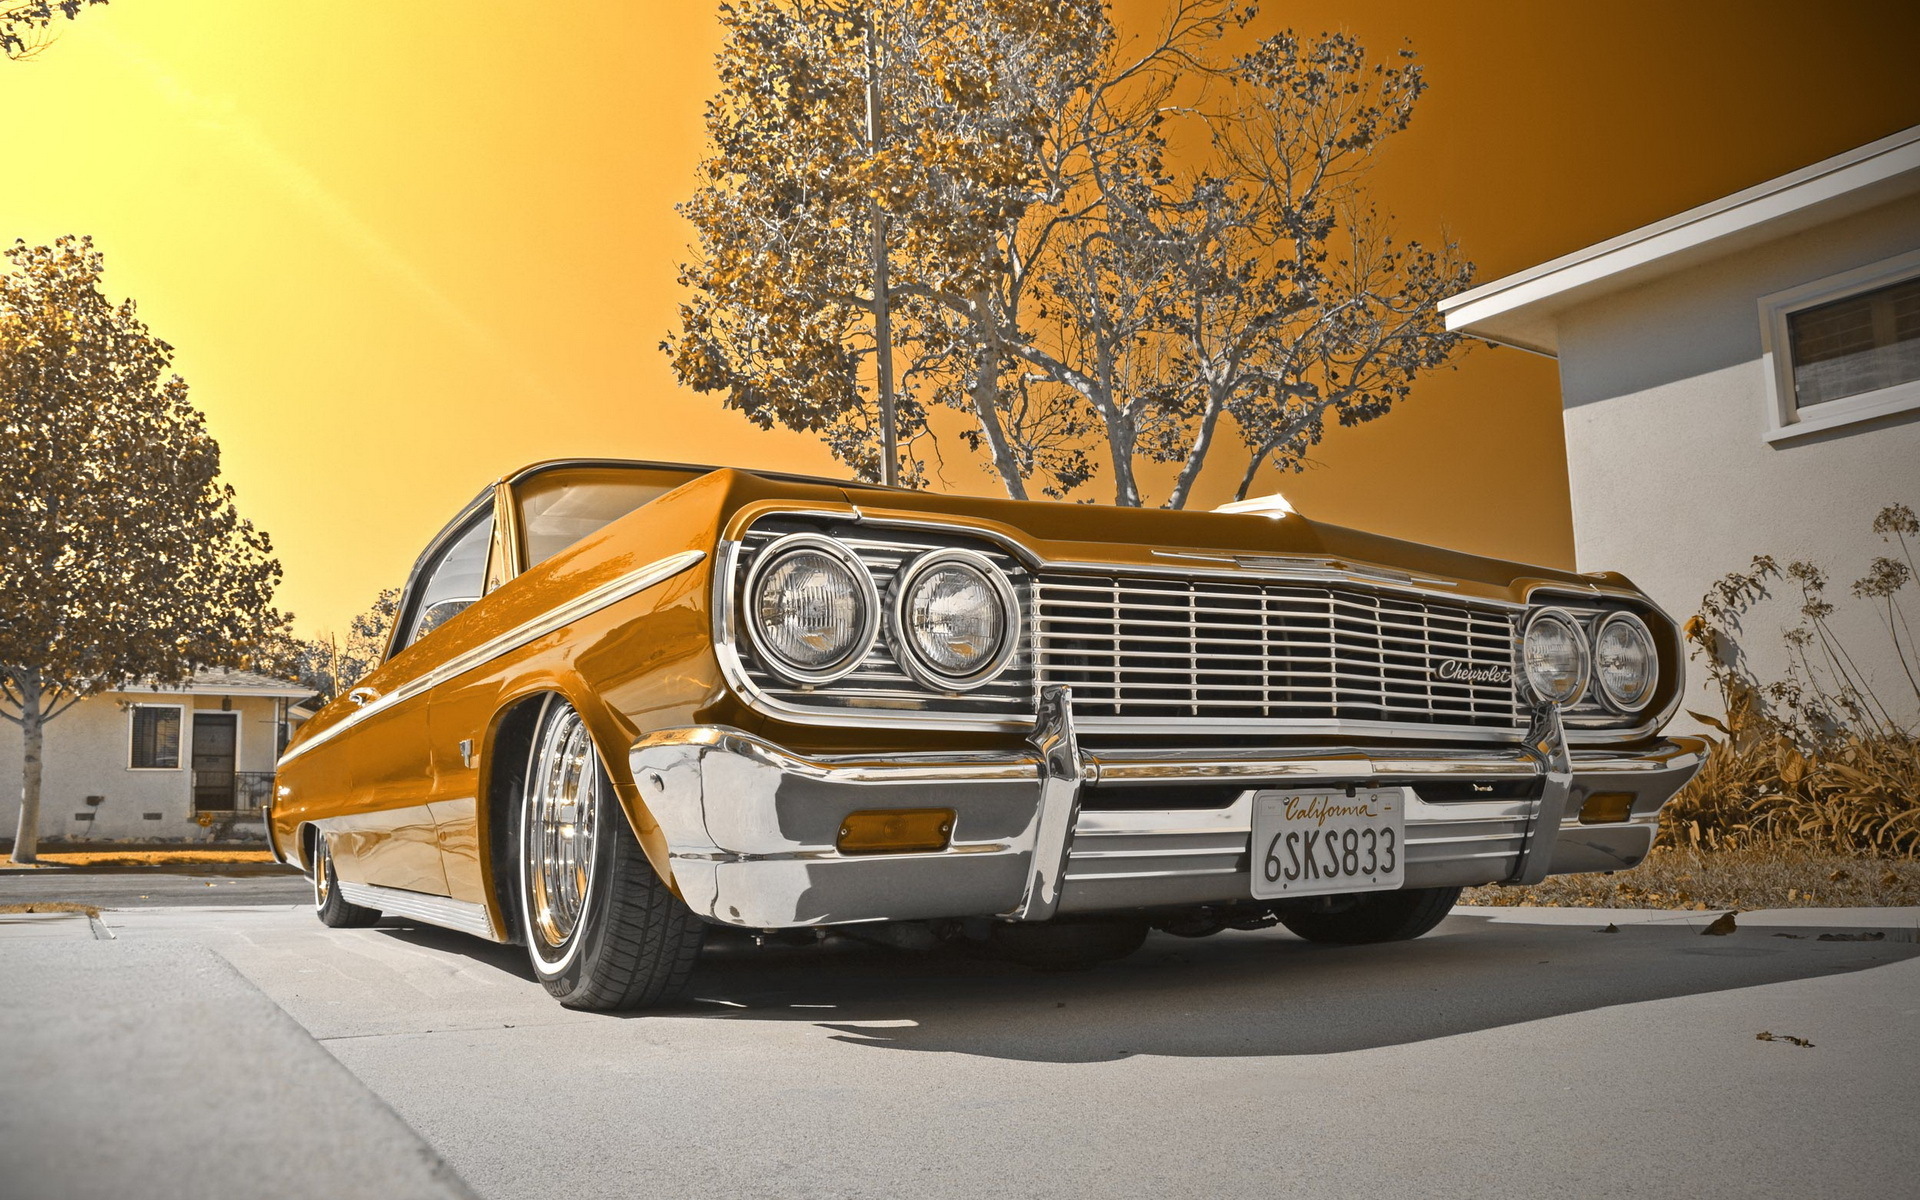 Chevy Impala Lowrider Muscle Cars Tuning Wallpaper Background